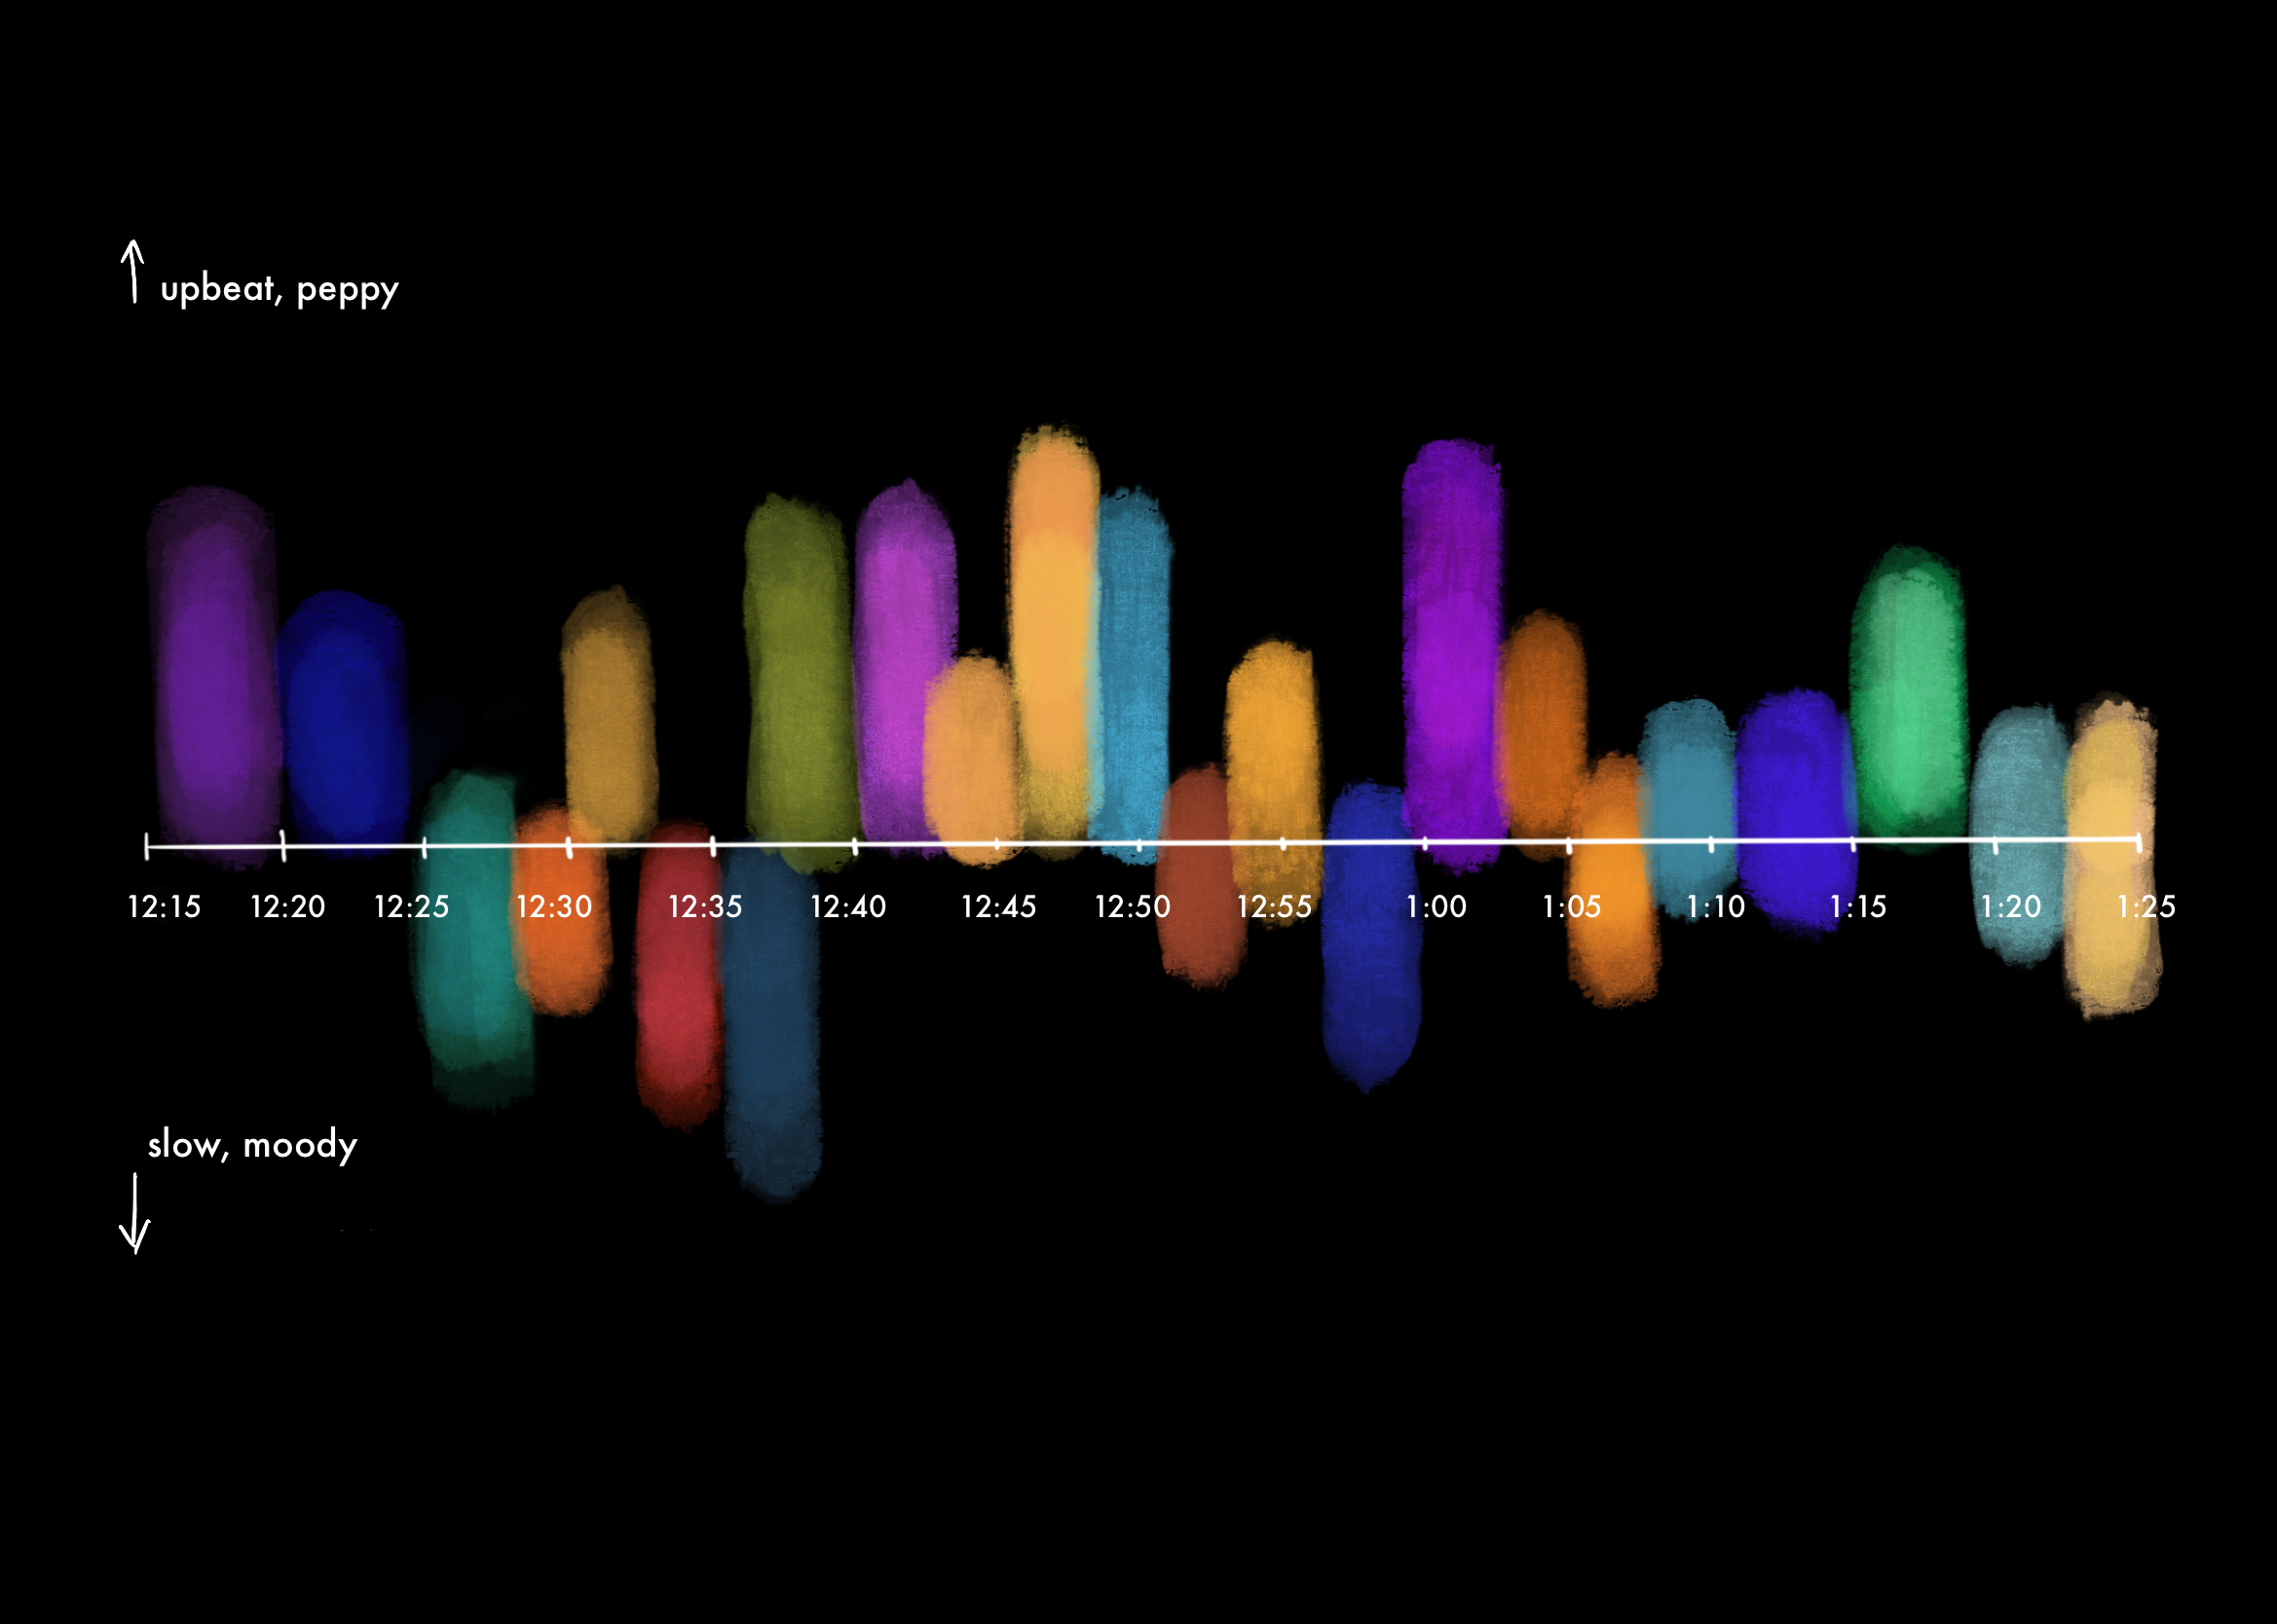 A graph with colored bars plotting songs over time.